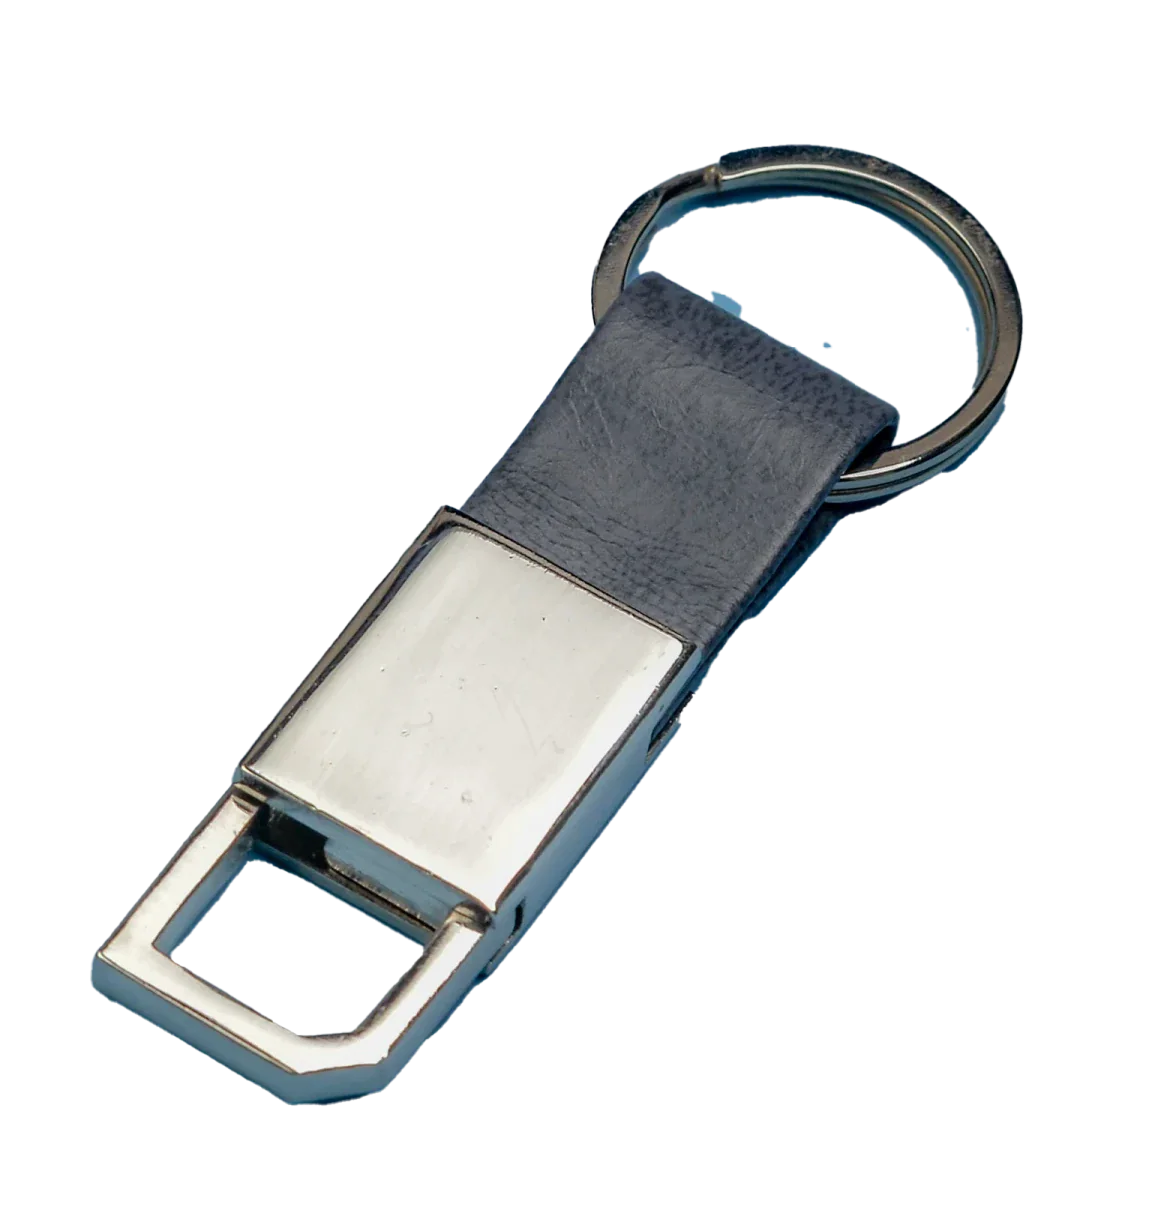 "A custom metal keychain made with premium materials for a long-lasting and durable accessory. "